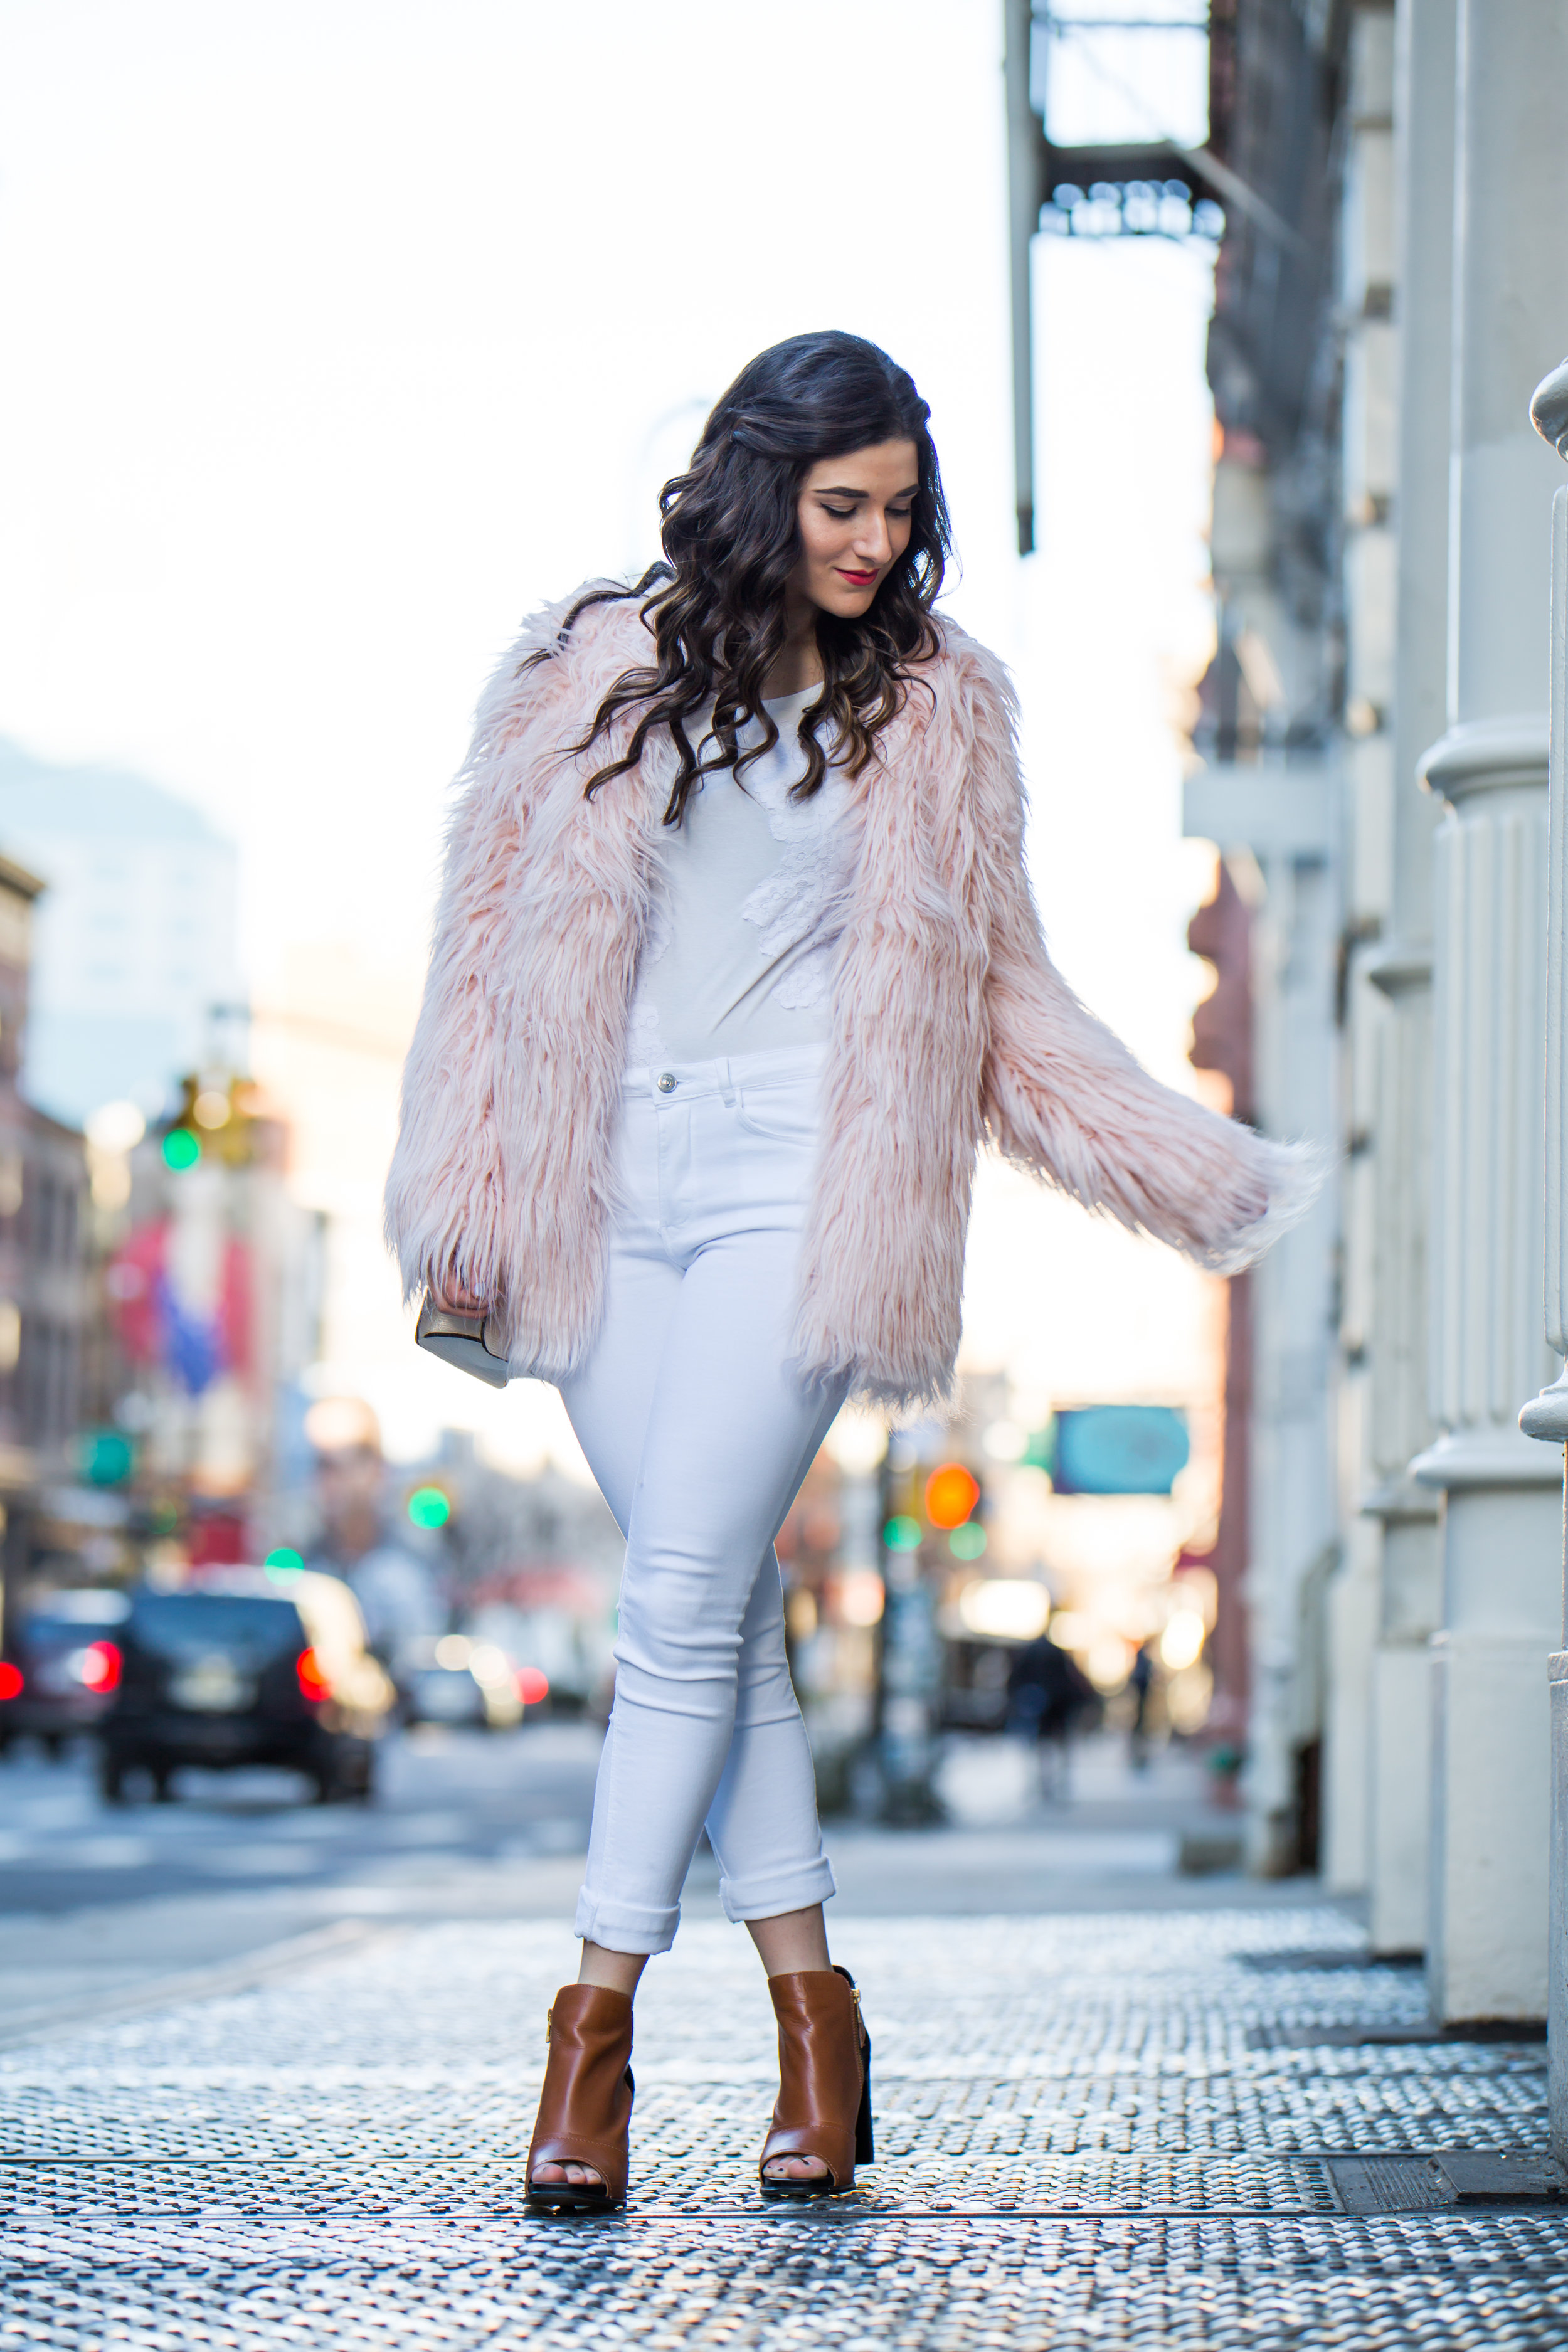 Pink Faux Fur Jacket White Jeans The Best Career Advice Esther Santer Fashion Blog NYC Street Style Blogger Outfit OOTD Trendy Winter Whites Henri Bendel Bag Tan Booties Girl Women Shop Sale Hair Shoes What To Wear Wearing Model Photoshoot Accessories.jpg